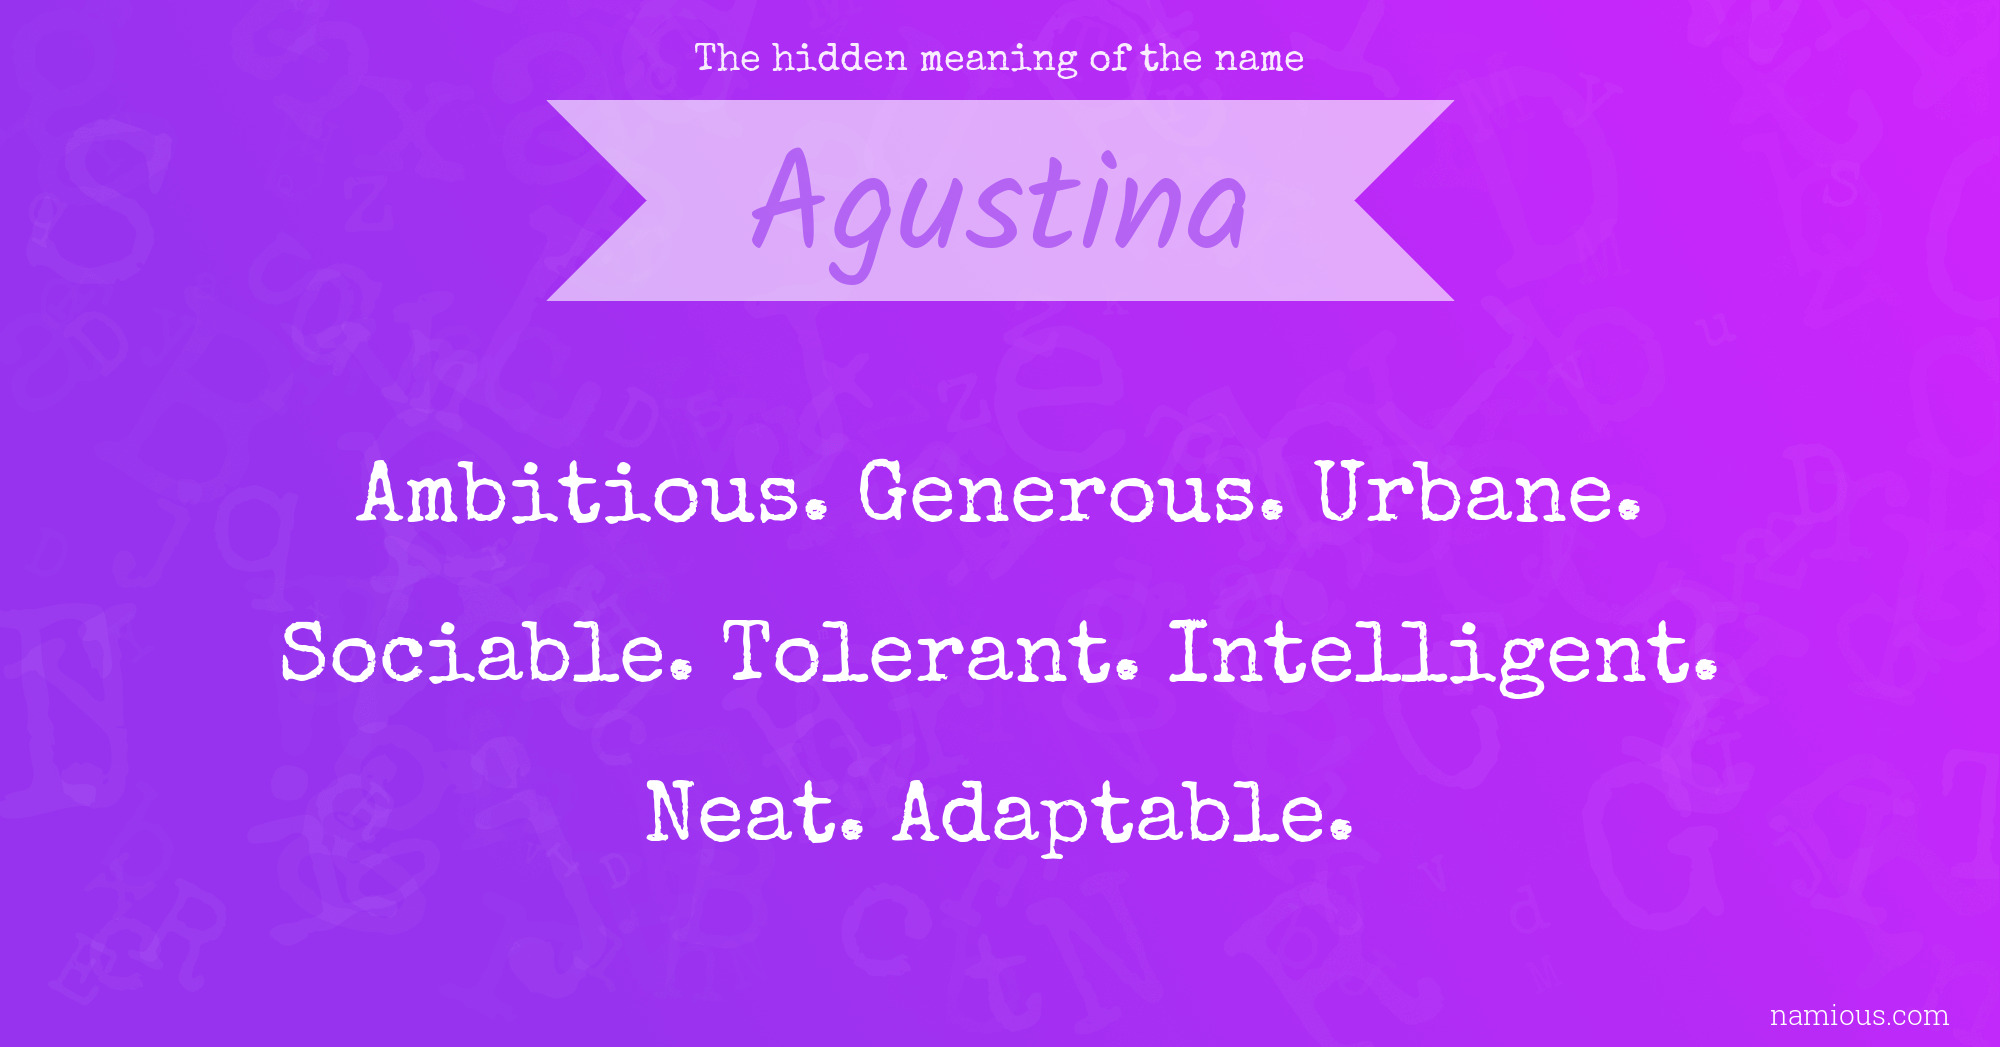 The hidden meaning of the name Agustina